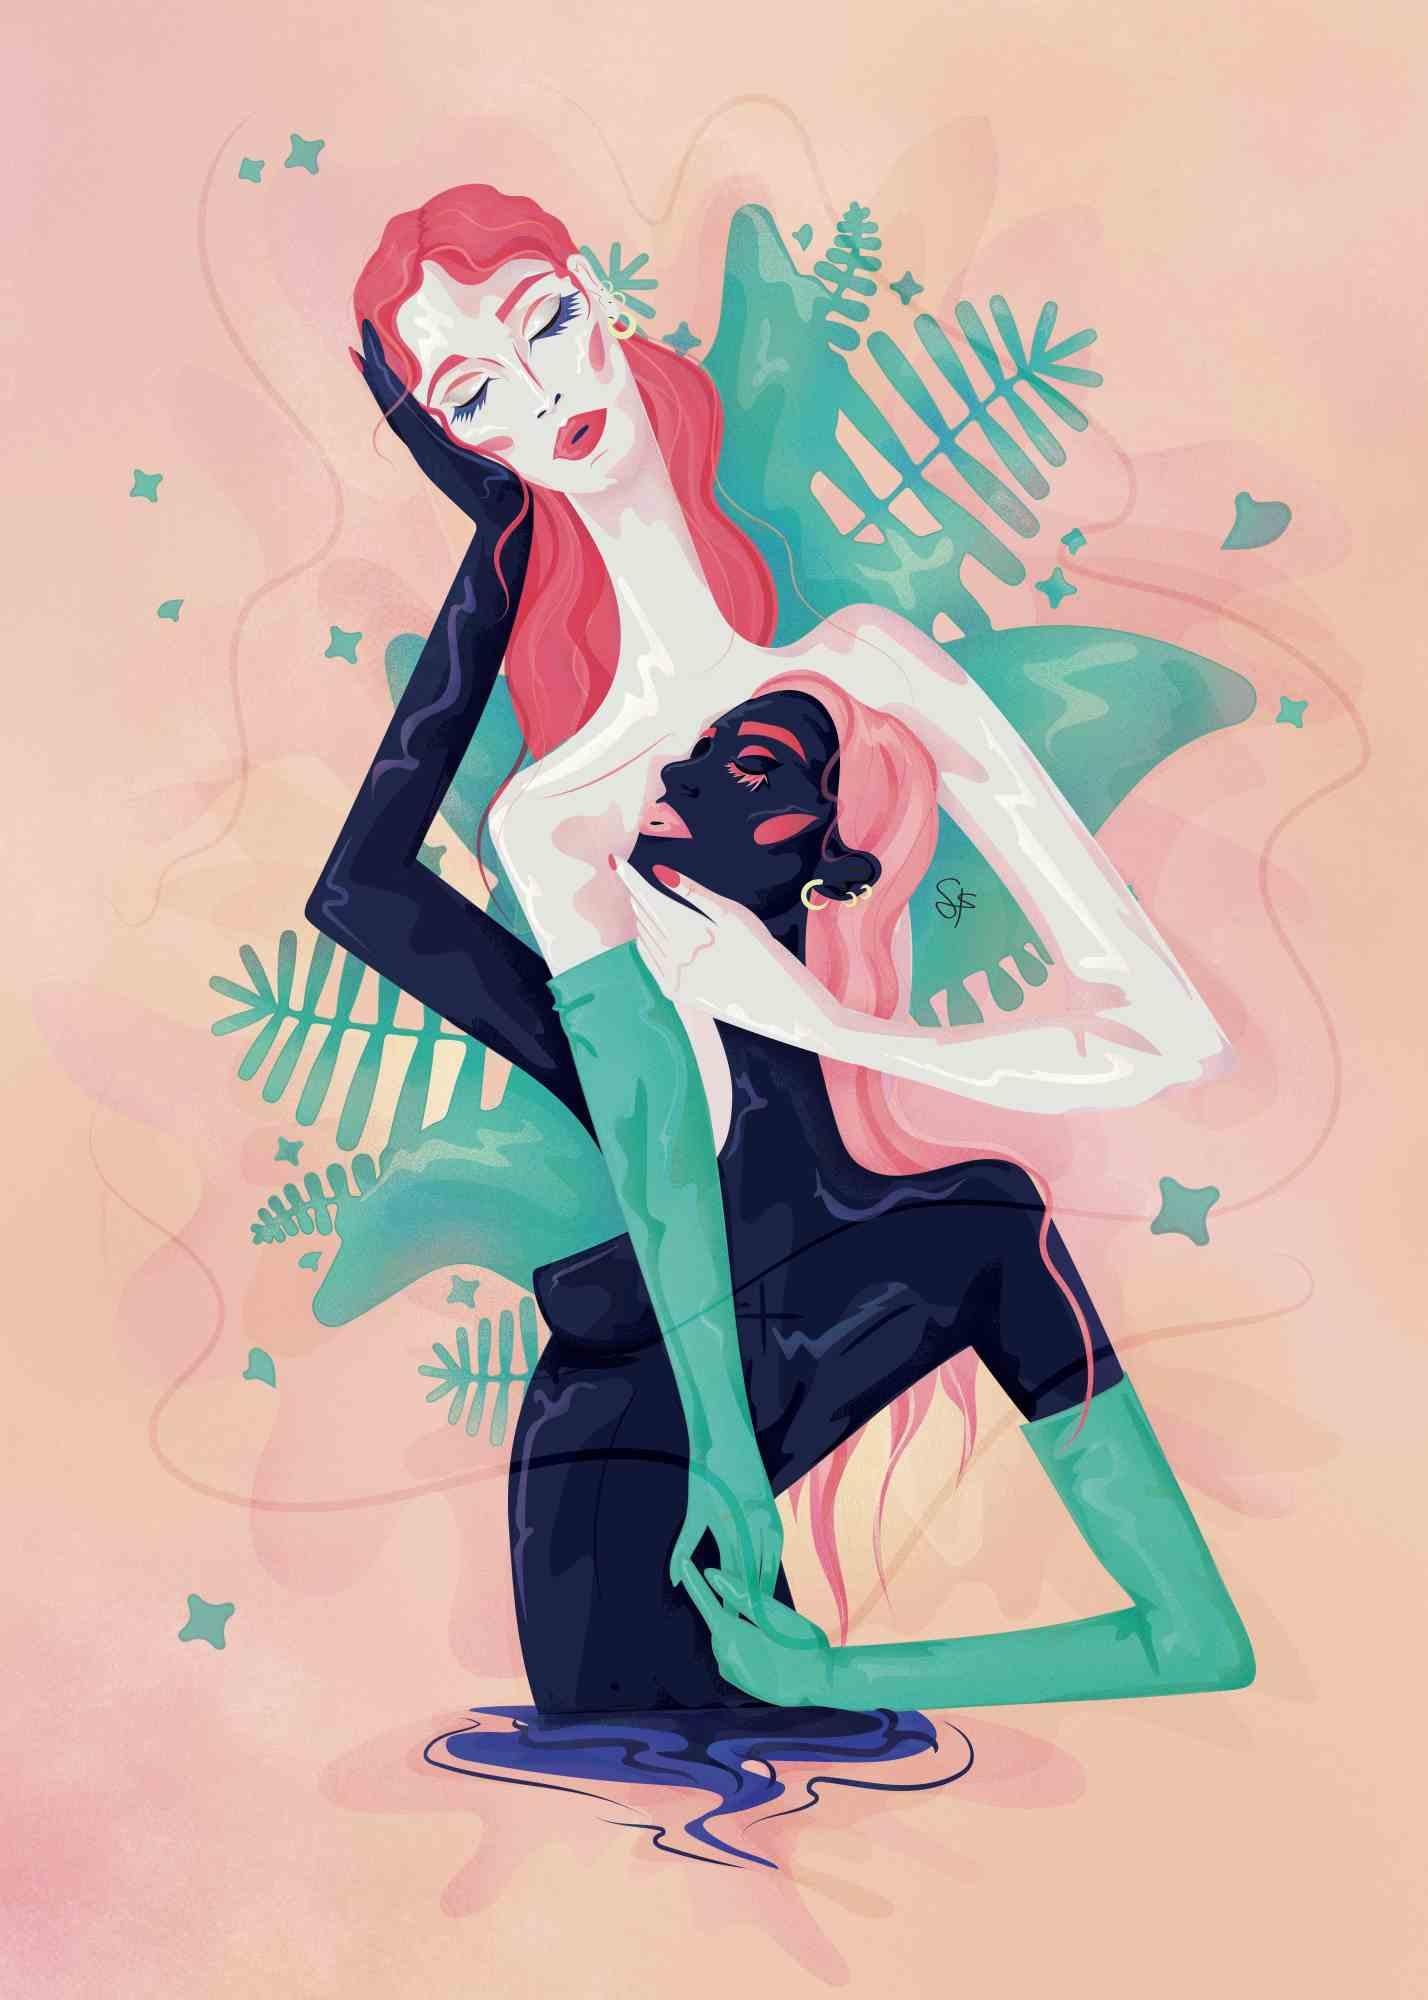 Present & Past is a beautiful illustration on paper (giclée print) realized by the Italian artist Sara Franzese in 2022.

Edition of 5. Hand-signed and numbered. 

The illustration represents two women, the Present that guards and holds the Past by